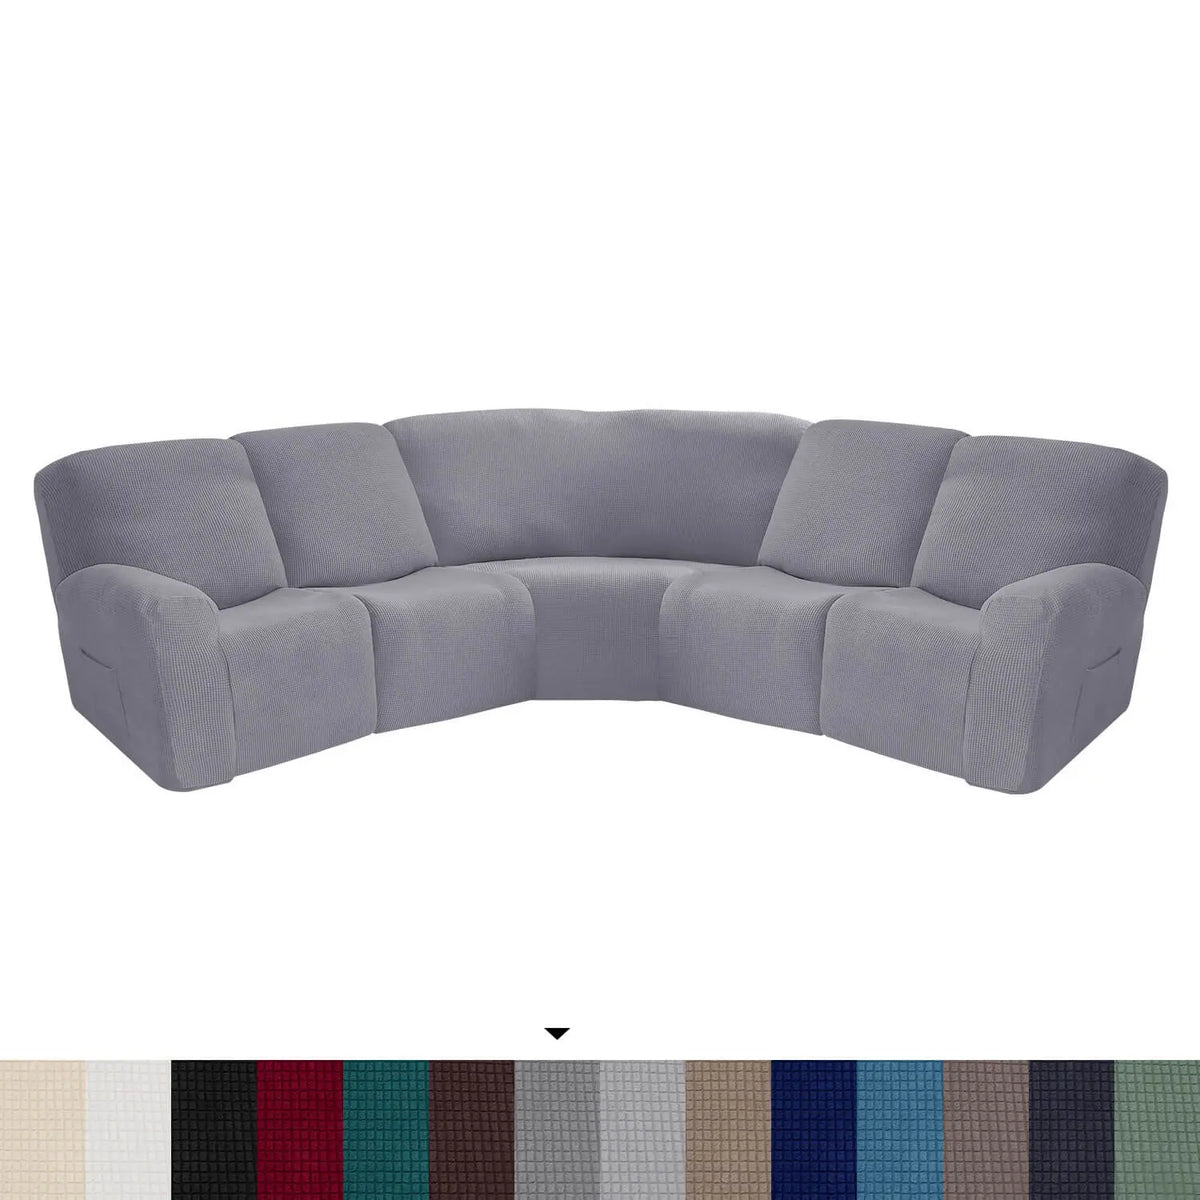 Crfatop L Shape Sectional Recliner Sofa Covers Corner Couch Covers Grey